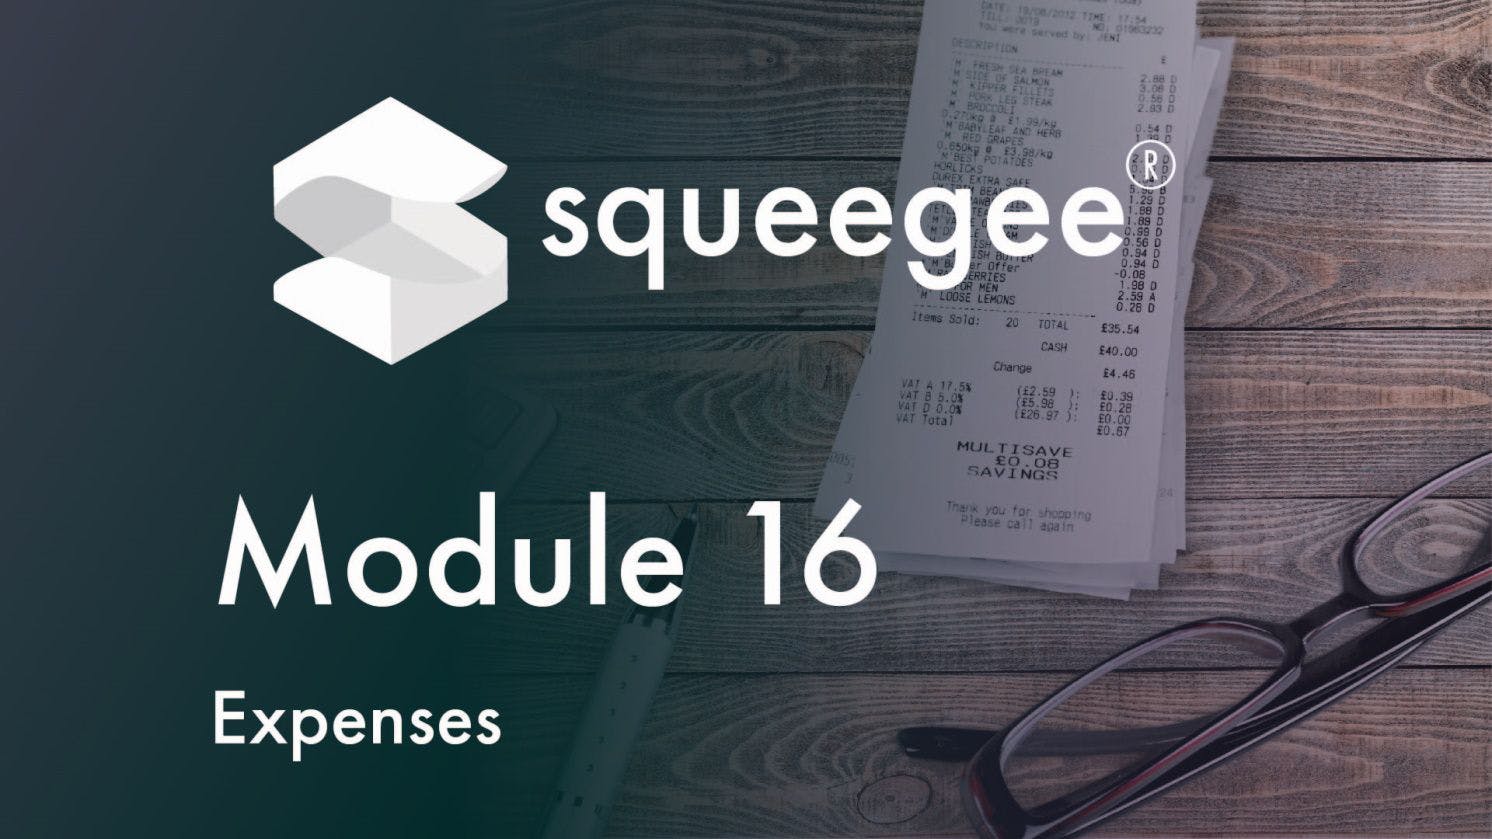 Squeegee Training Academy Module 16 Expenses